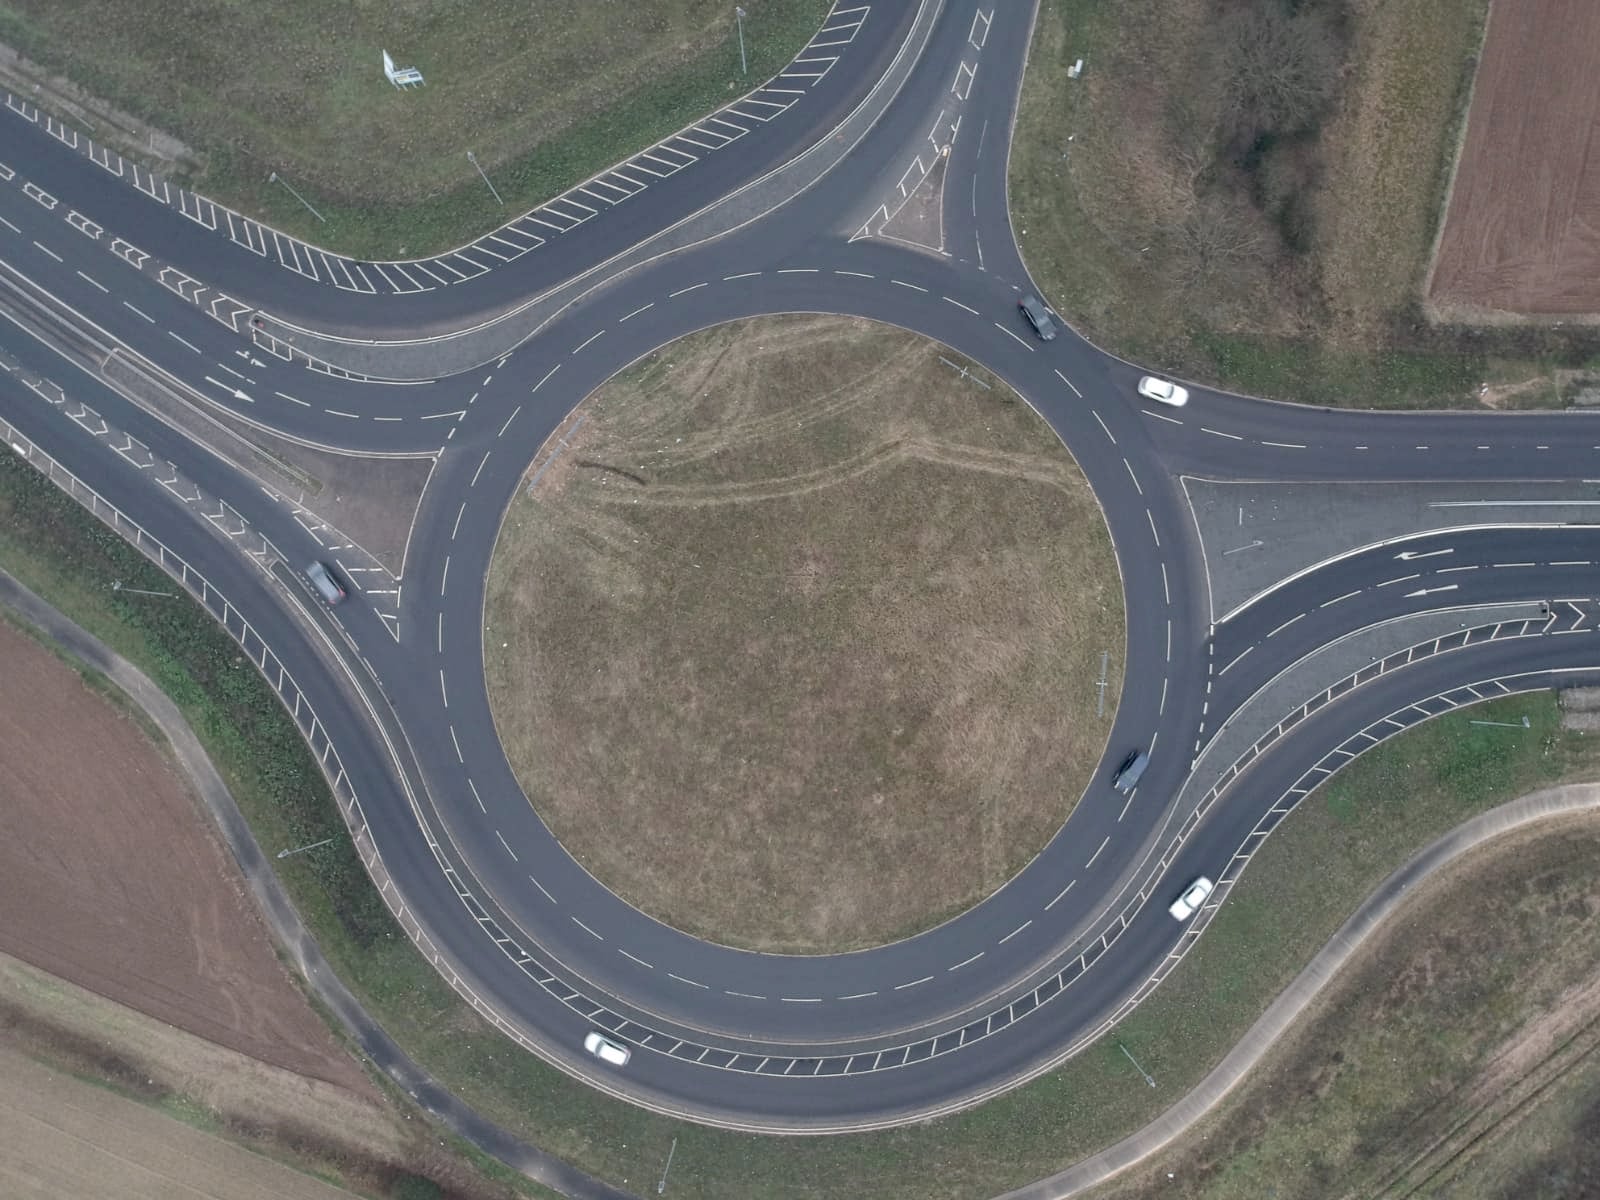 One of the "very round" roundabouts found on the Broadland Northway, north of Norwich.